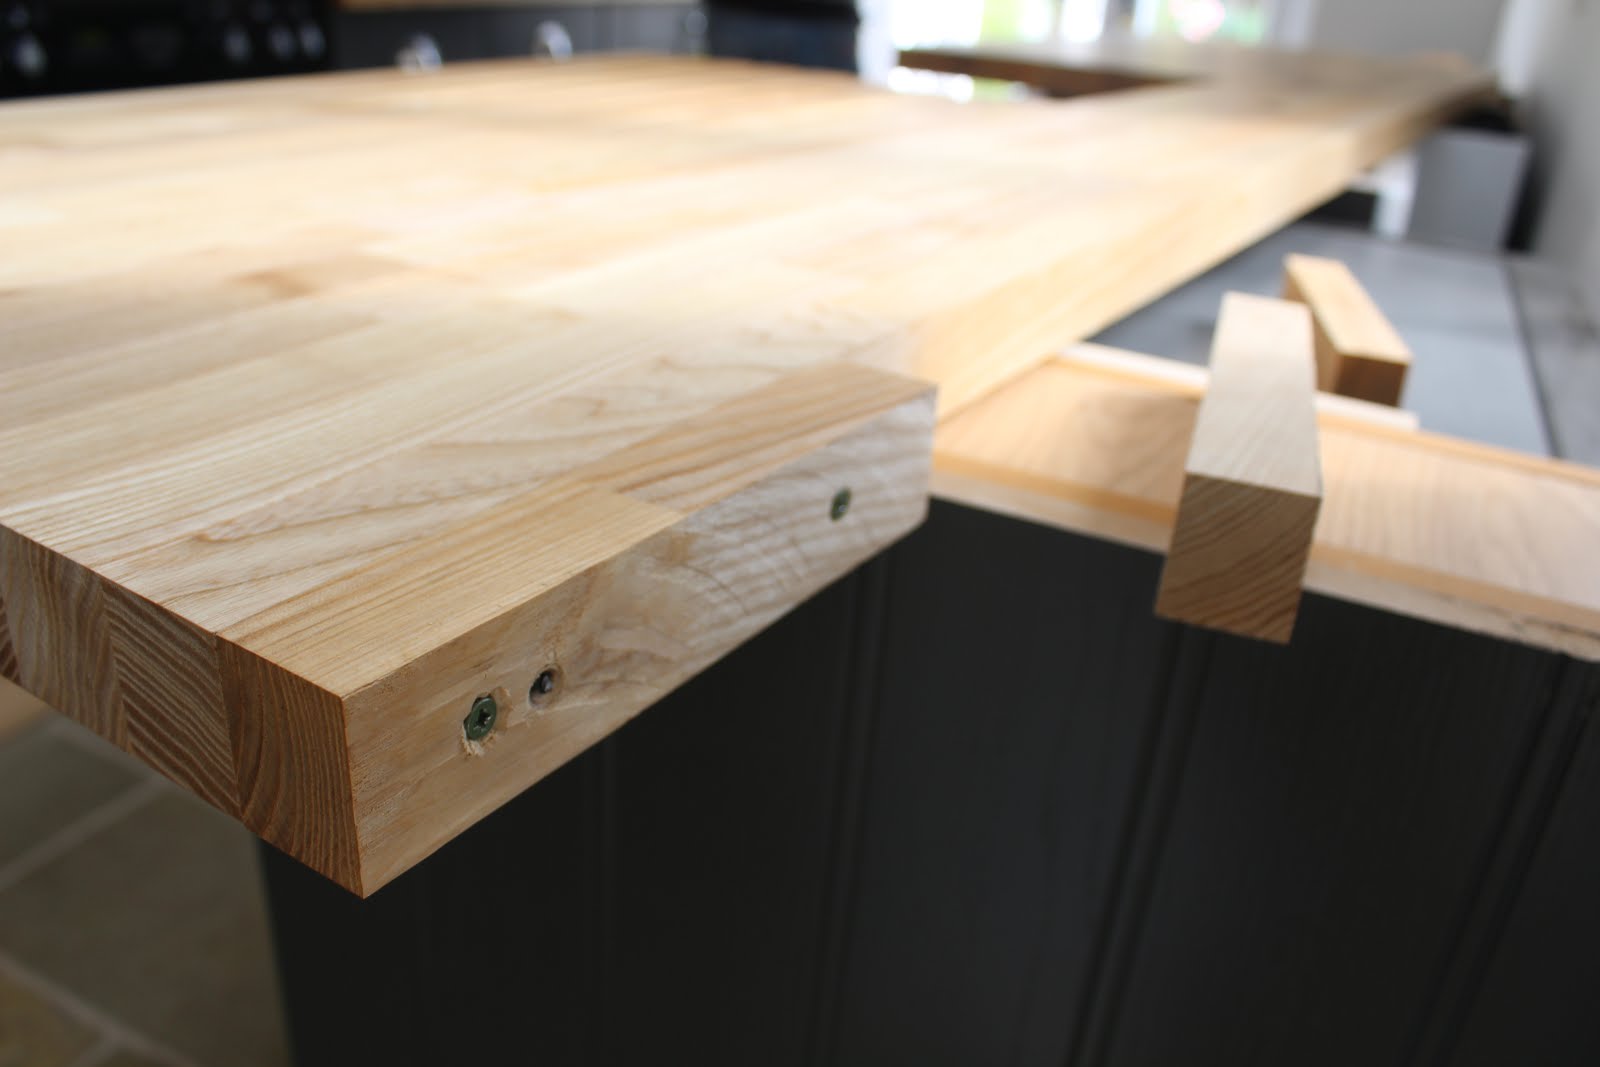 Adding extra section to wood worktop